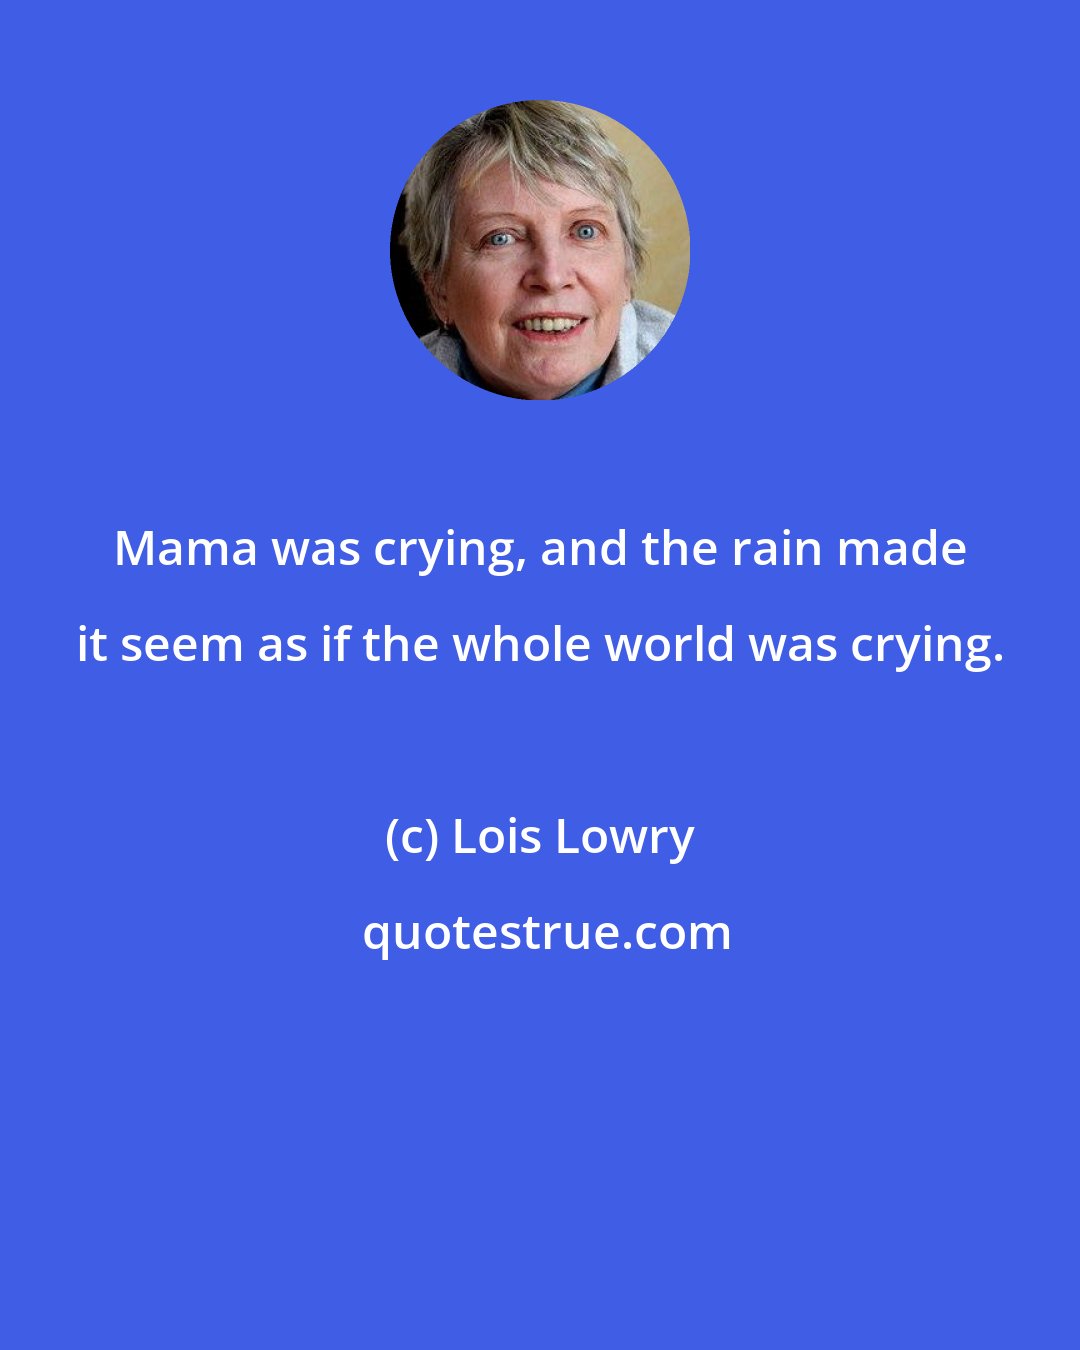 Lois Lowry: Mama was crying, and the rain made it seem as if the whole world was crying.